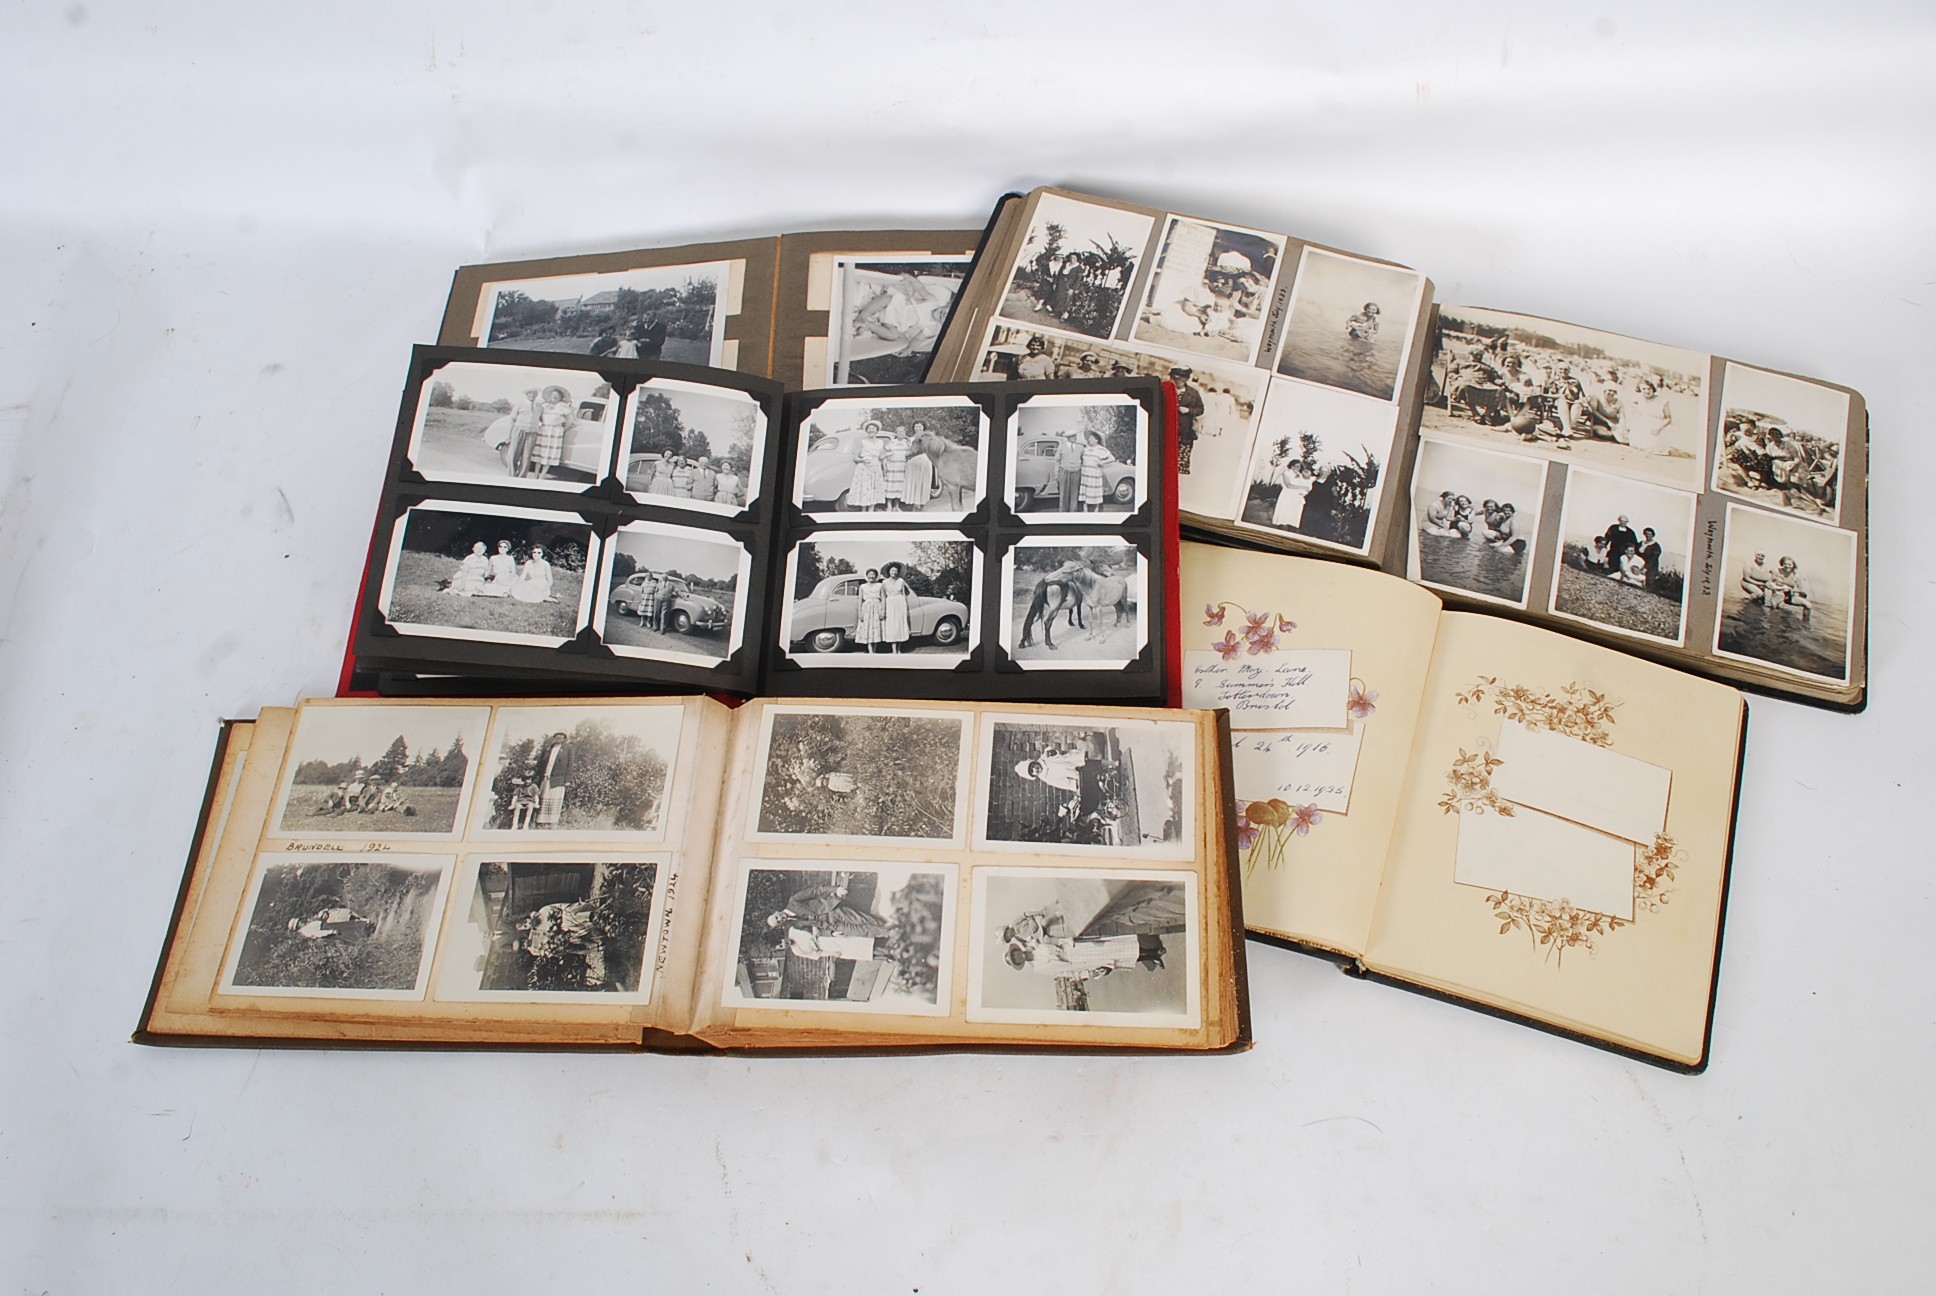 5 vintage 20th century photo albums, each filled with photos including views, portraits and other